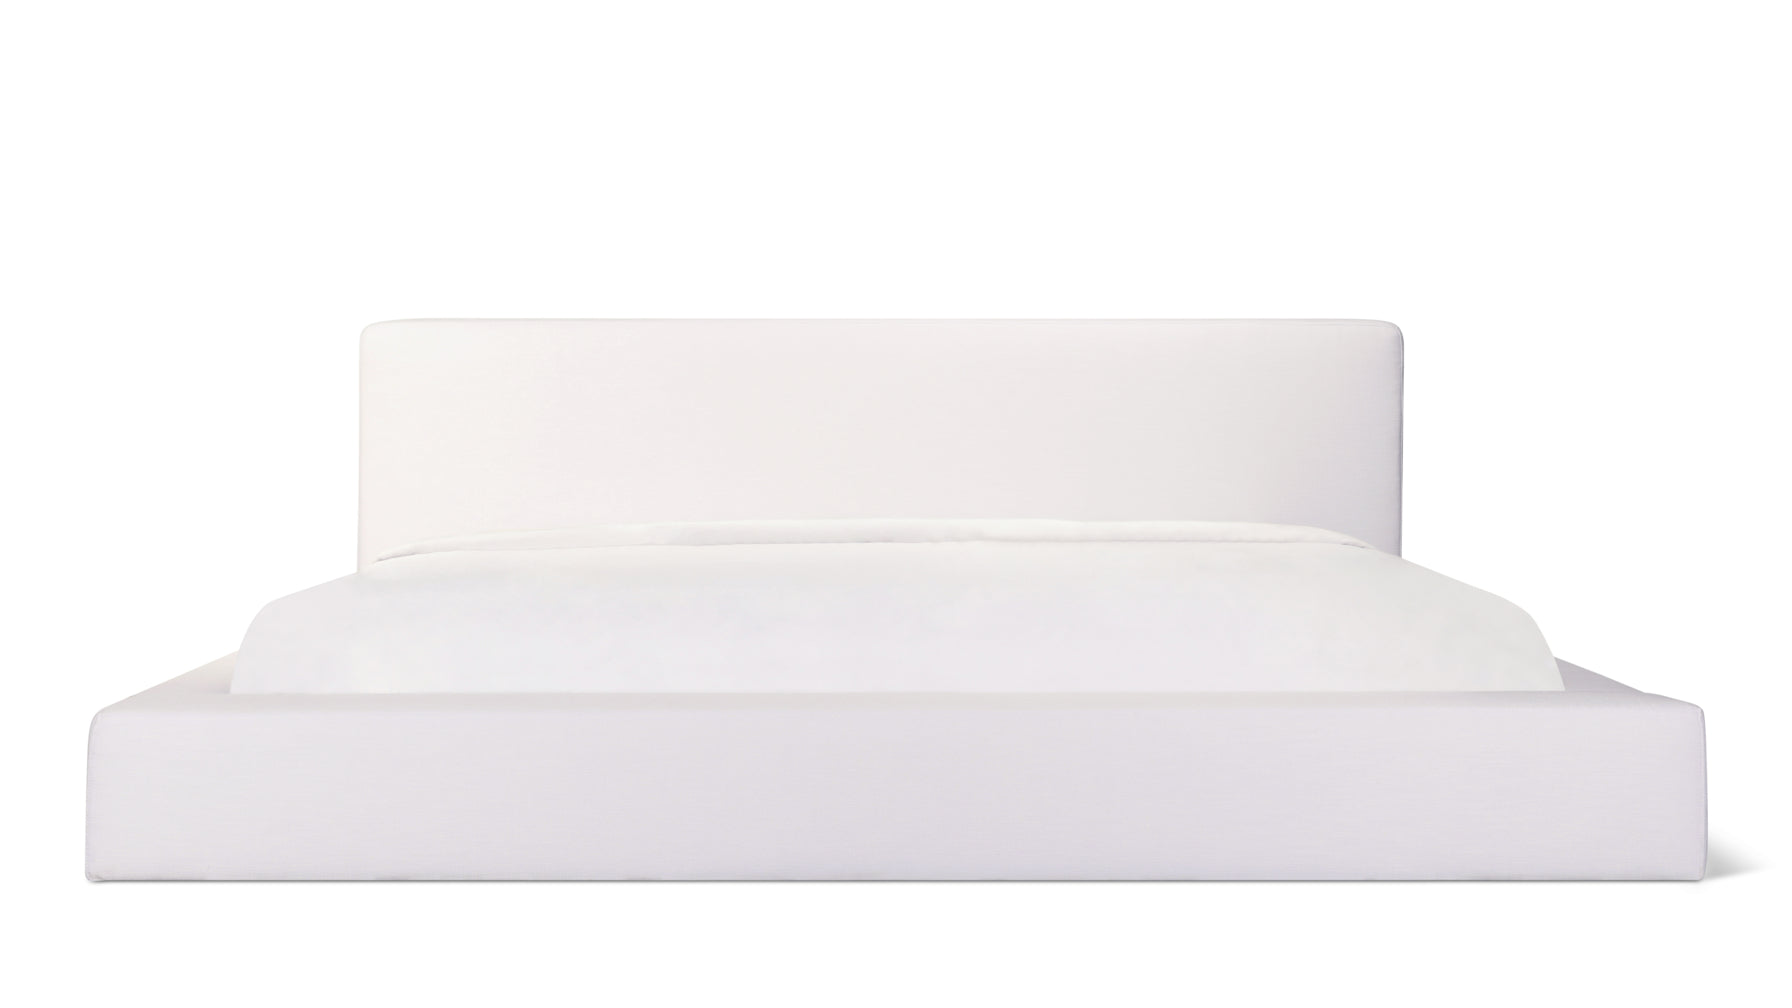 Movie Night™ Bed, Queen, White - Image 10